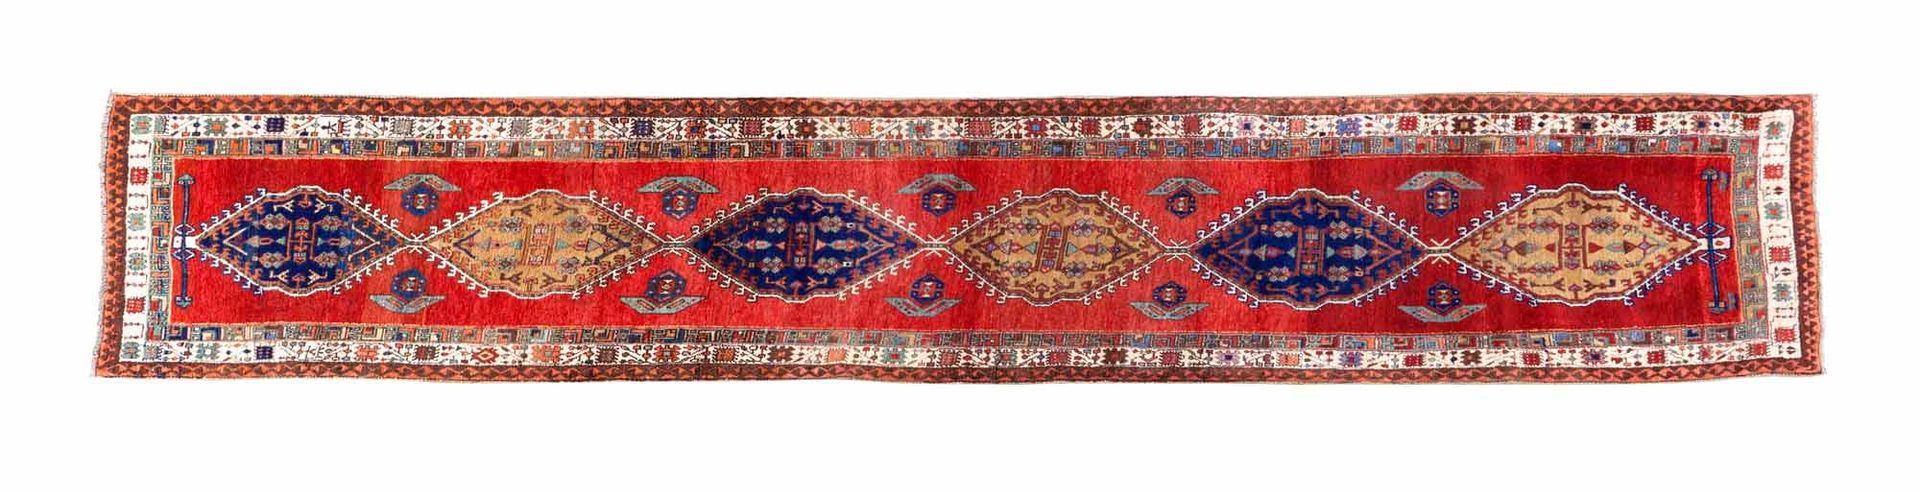 Null Tapis galerie SARAB (Perse), 1er tiers du 20e siècle

Dimensions : 405 x 95&hellip;